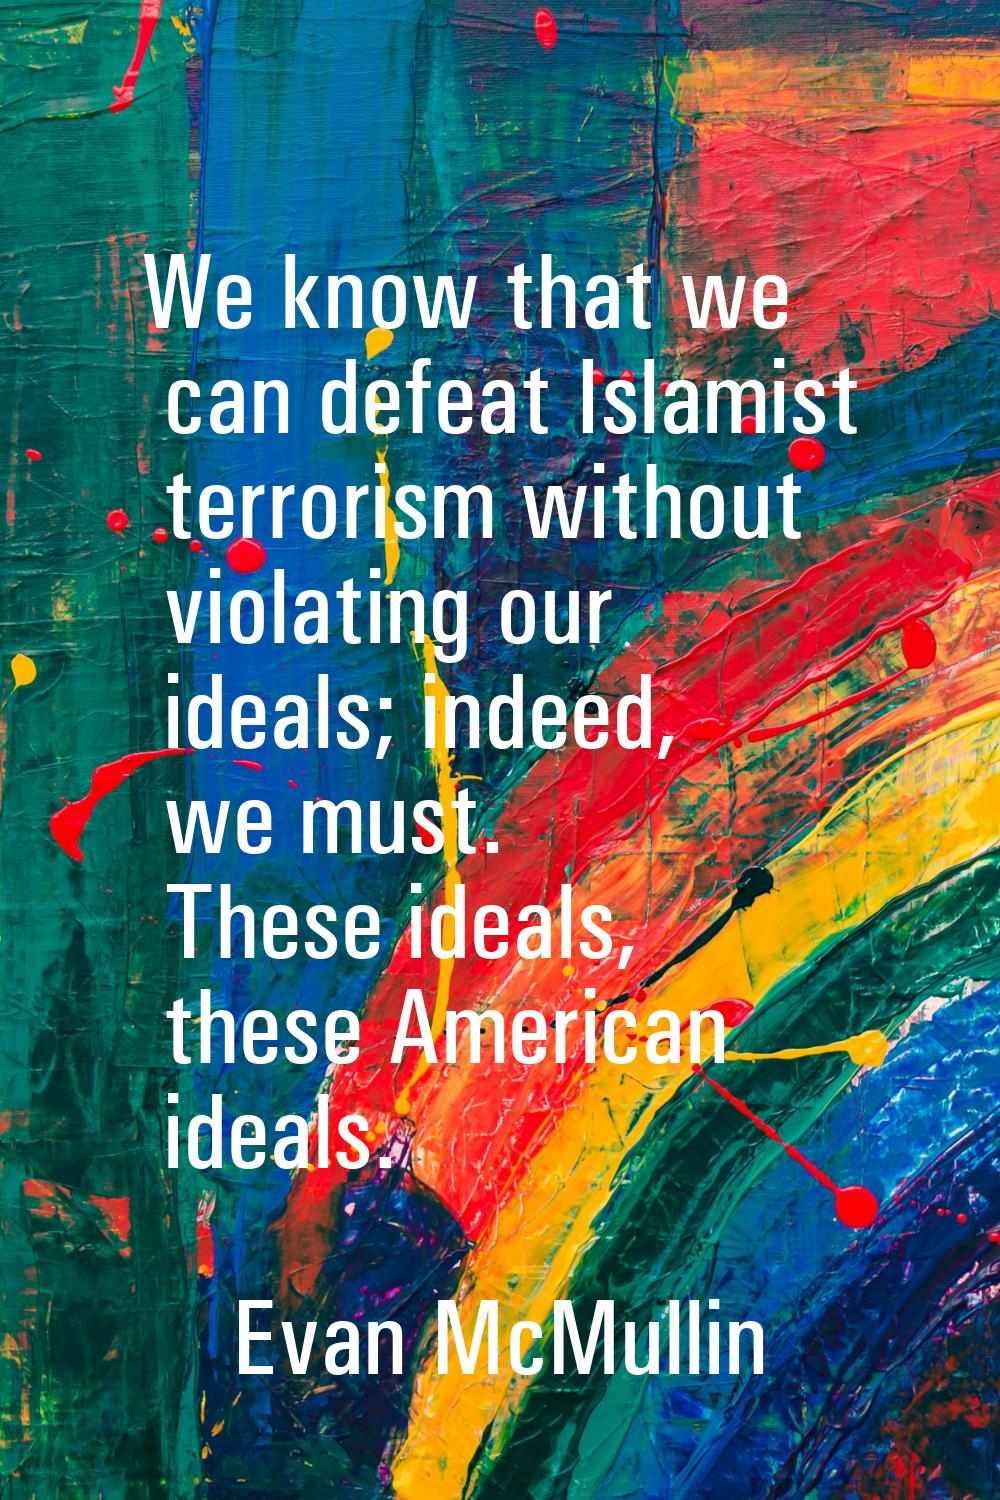 We know that we can defeat Islamist terrorism without violating our ideals; indeed, we must. These 